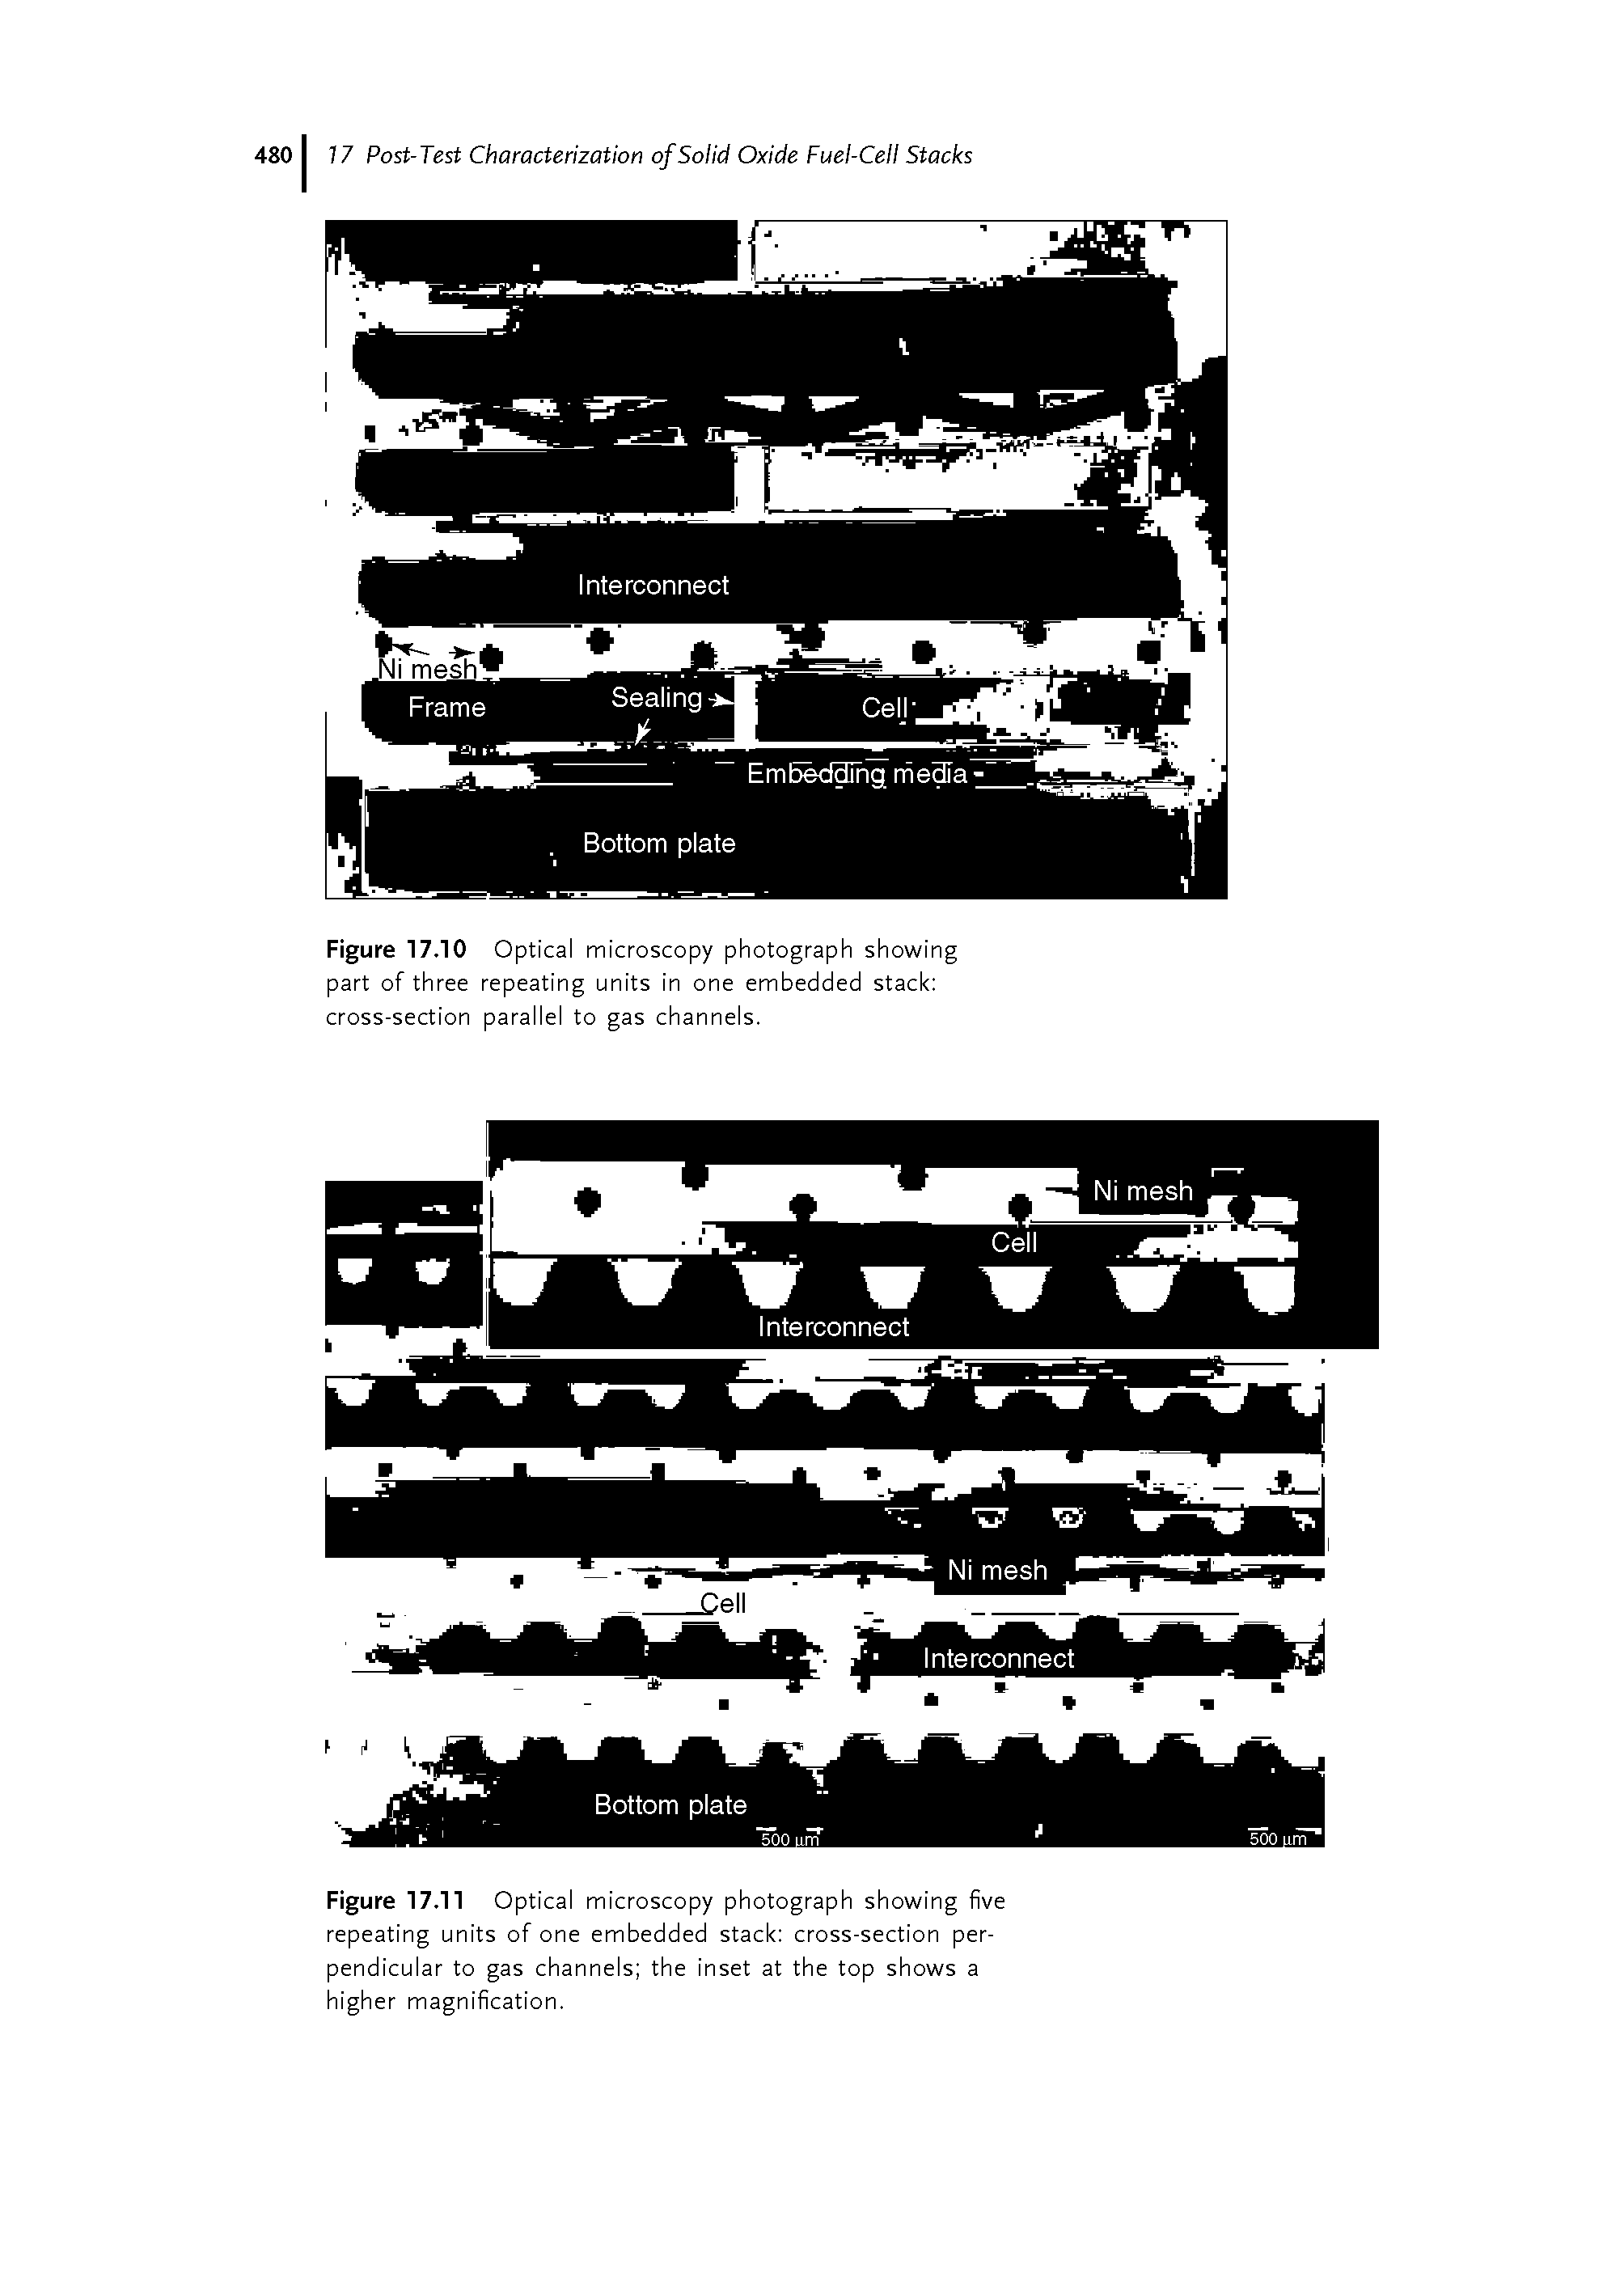 Figure 17.11 Optical microscopy photograph showing five repeating units of one embedded stack cross-section perpendicular to gas channels the inset at the top shows a higher magnification.